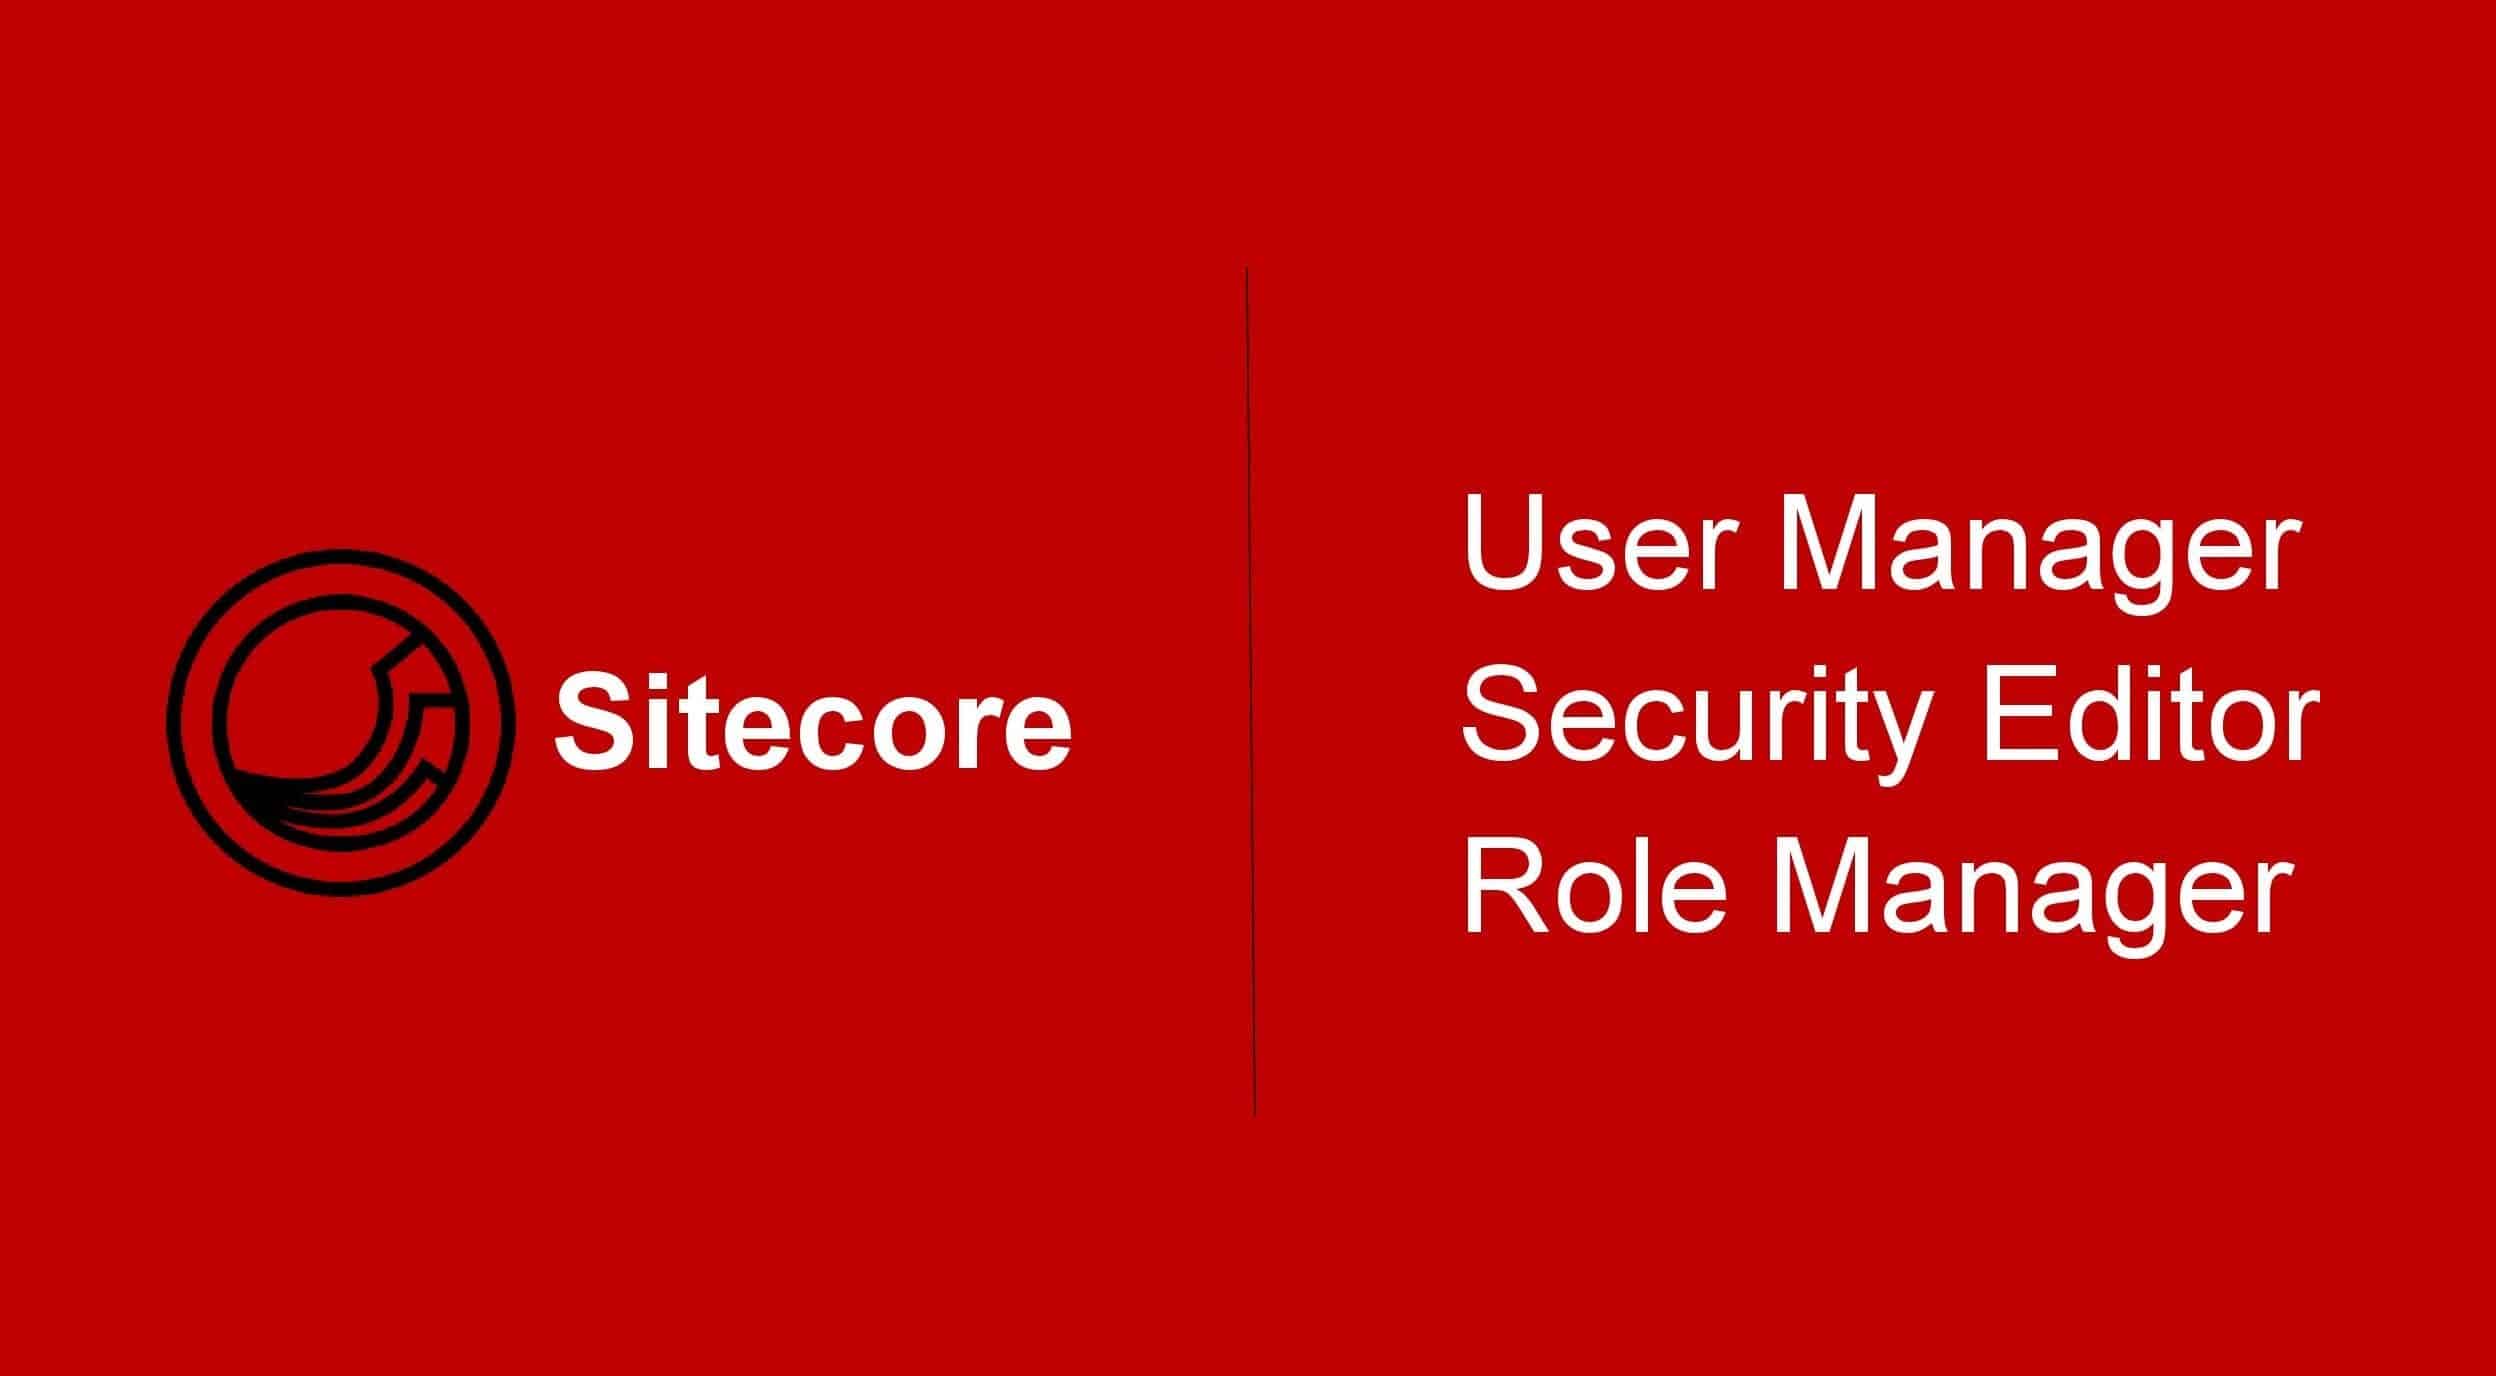 Sitecore Roles and Access Permissions with Azure AD